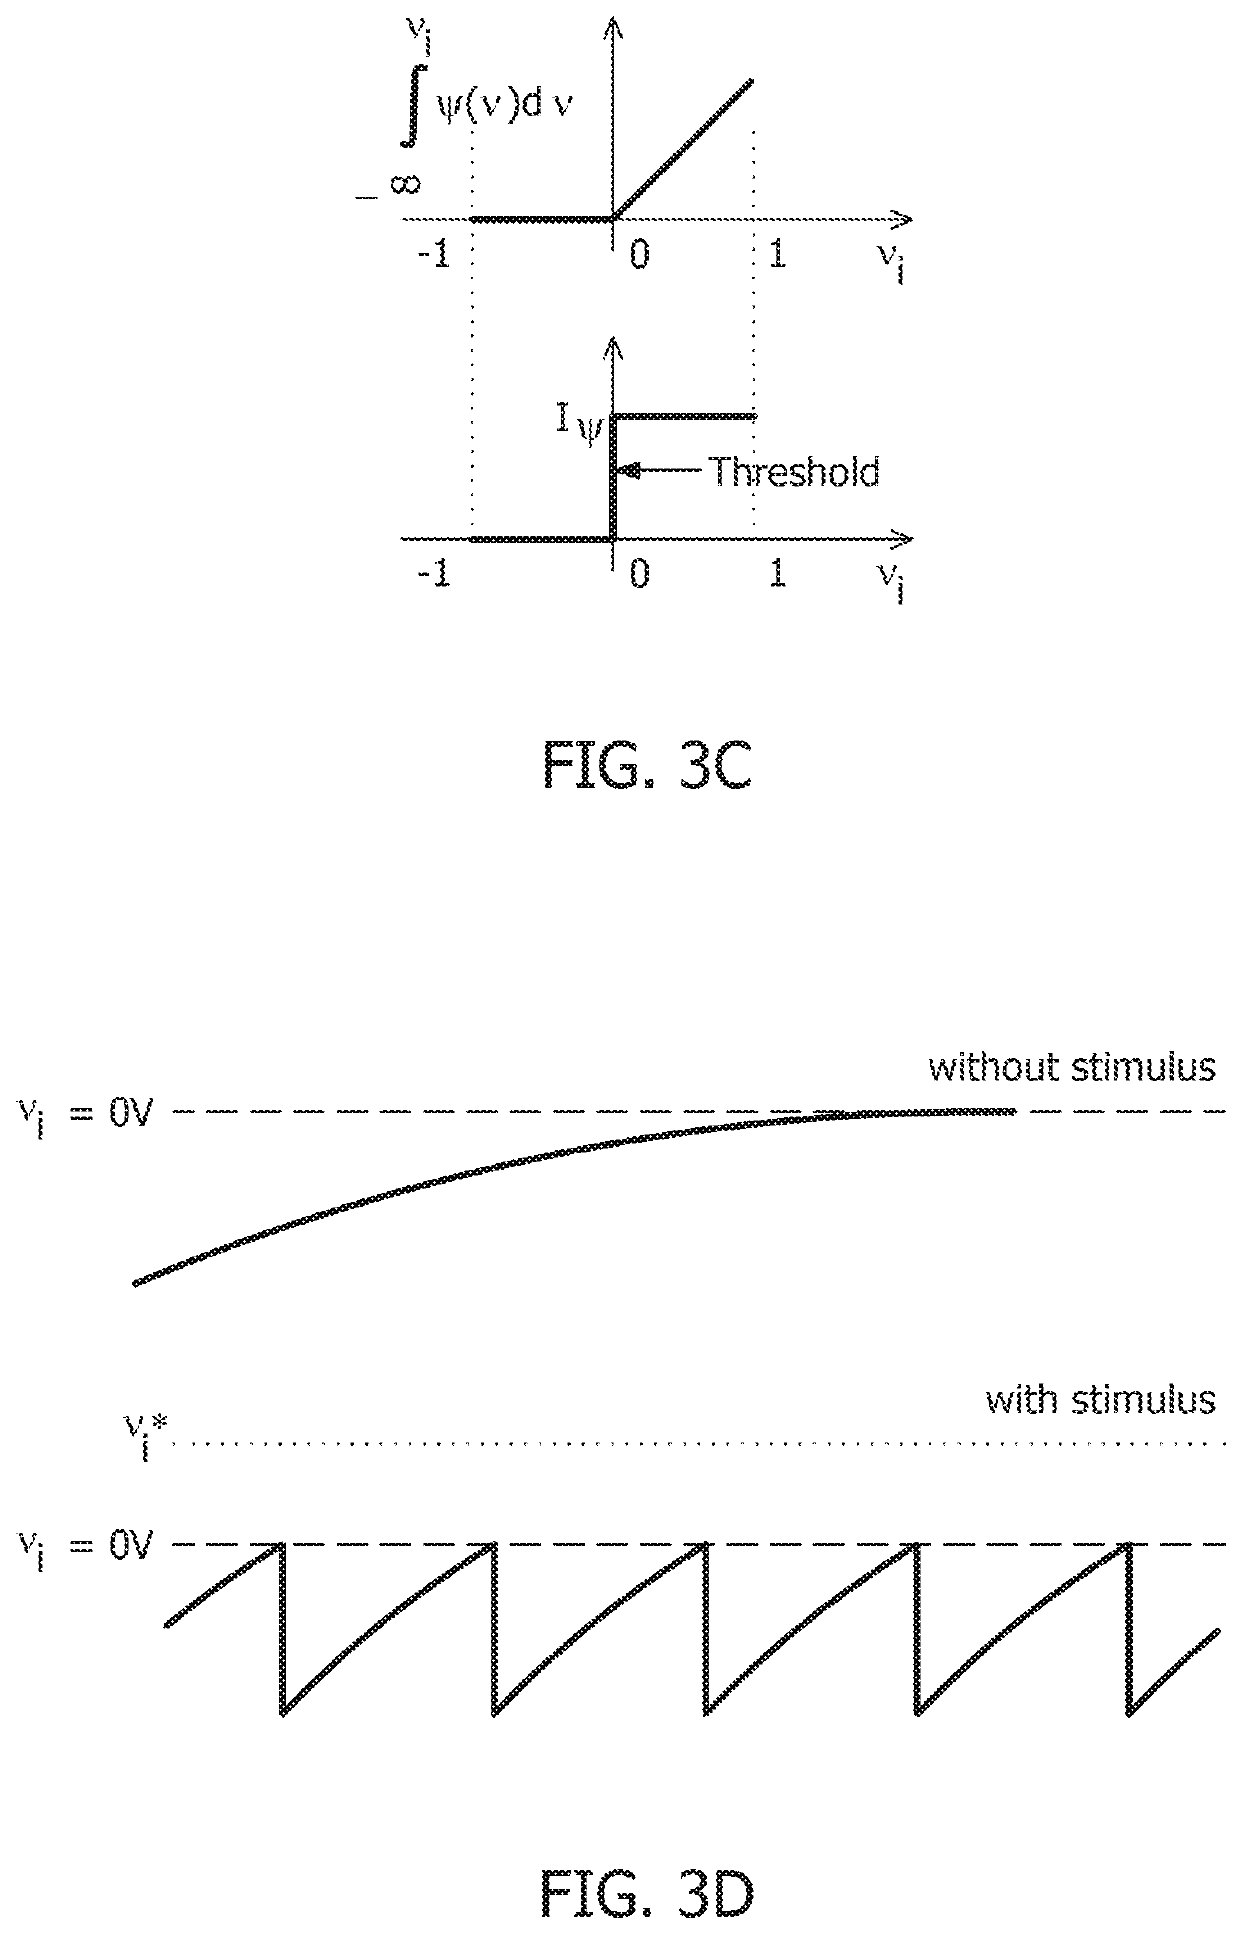 Method for designing scalable and energy-efficient analog neuromorphic processors